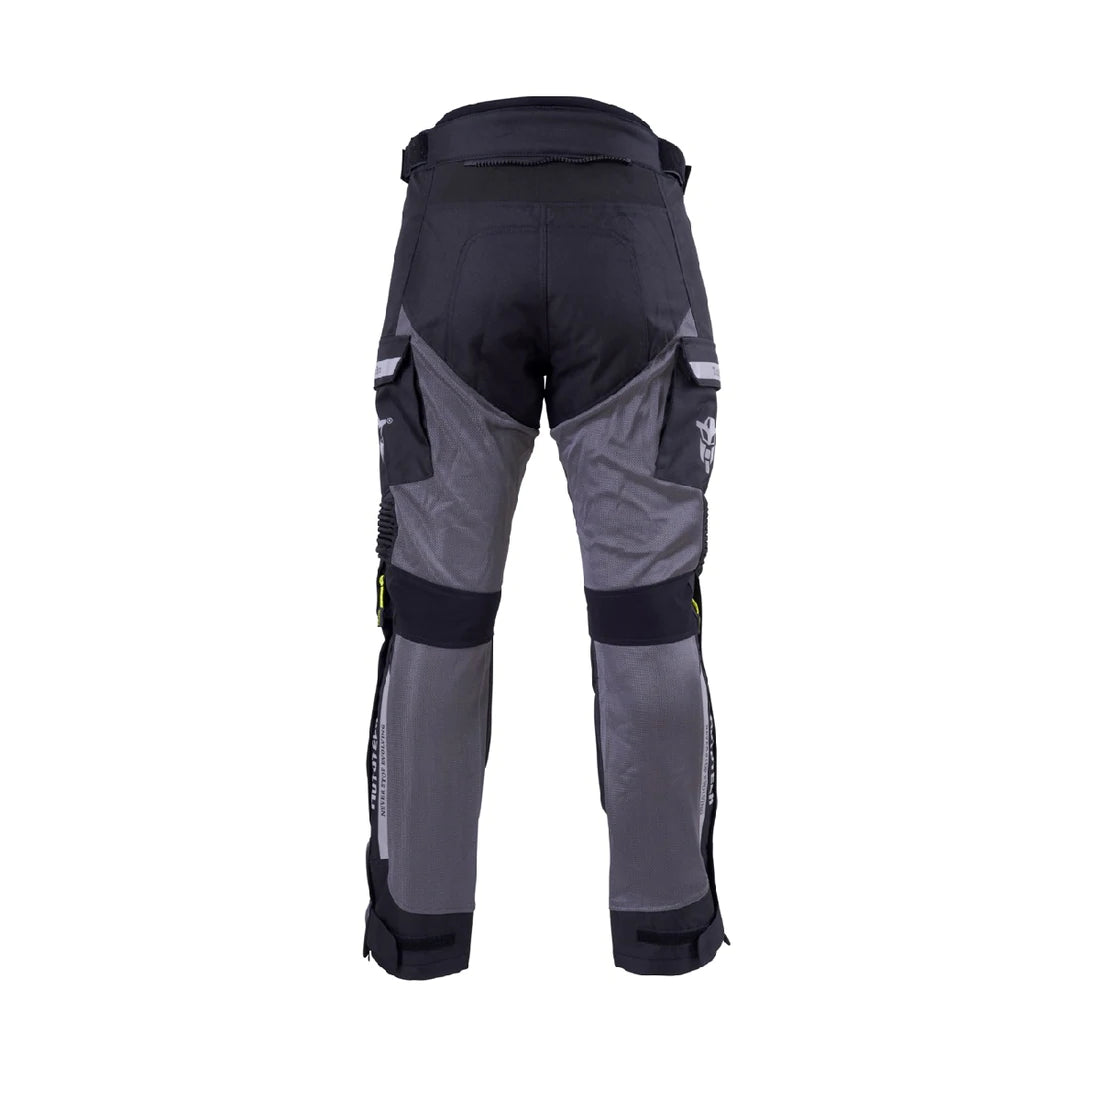 SCALA STREET RIDING PANT – Open Road Pune | Riding Gear